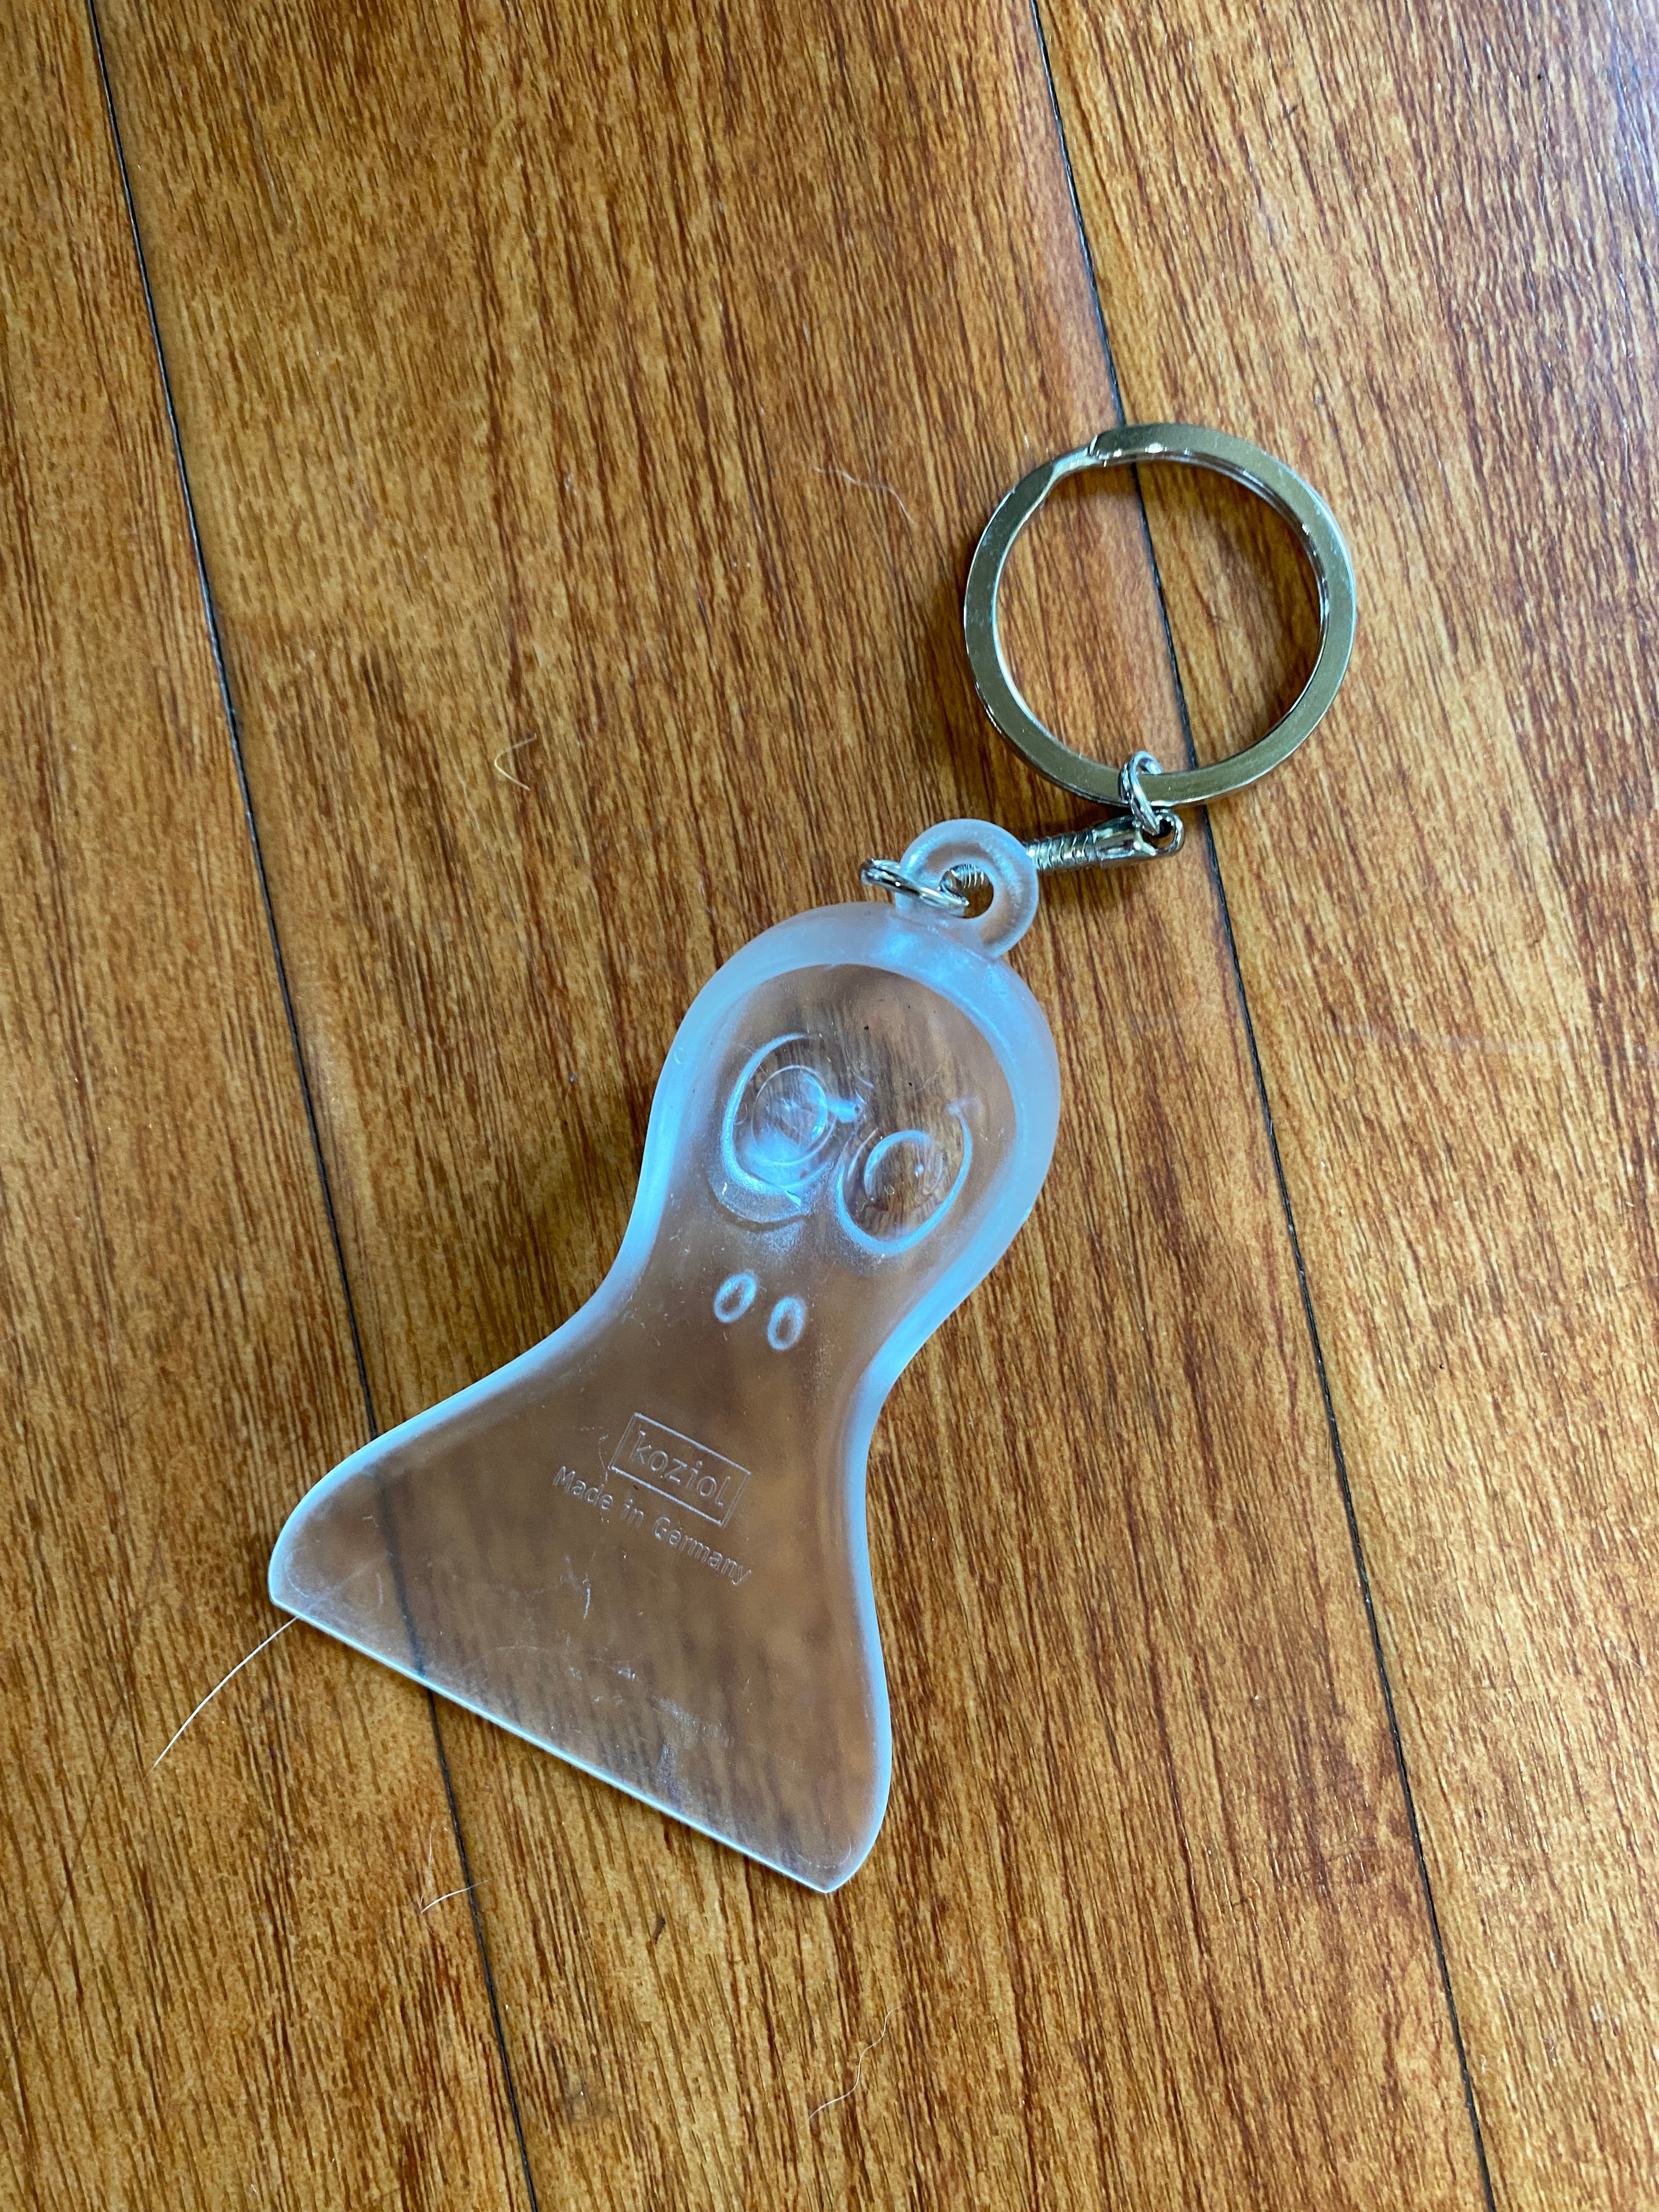 Clear Plastic 'Yeti' Mini Ice Scraper, with a large eyed face on the grip of the scraper viewed from the back